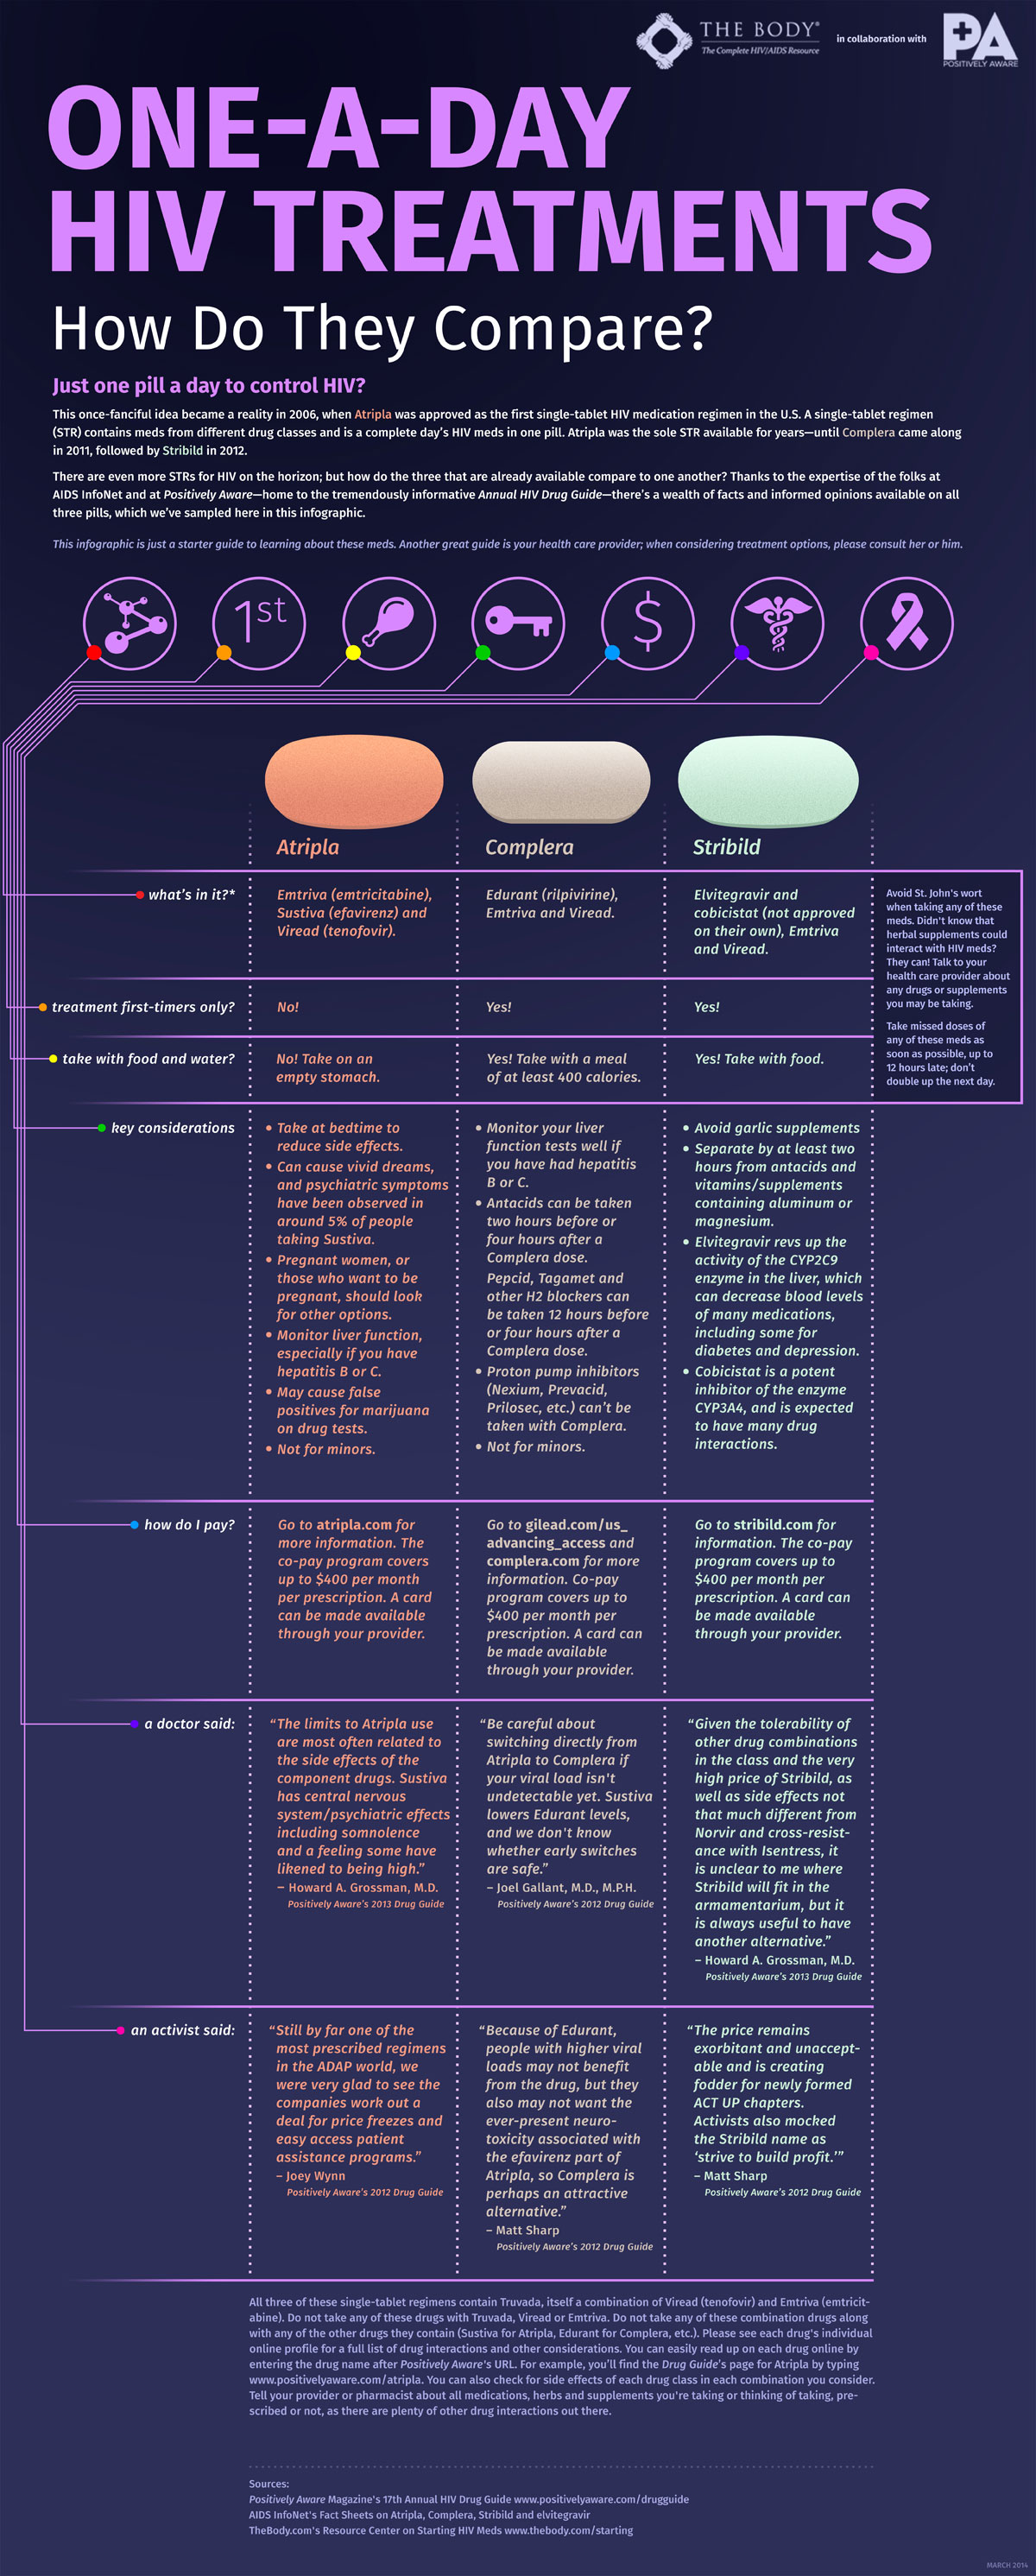 One A Day Hiv Treatments How Do They Compare Infographic Resource